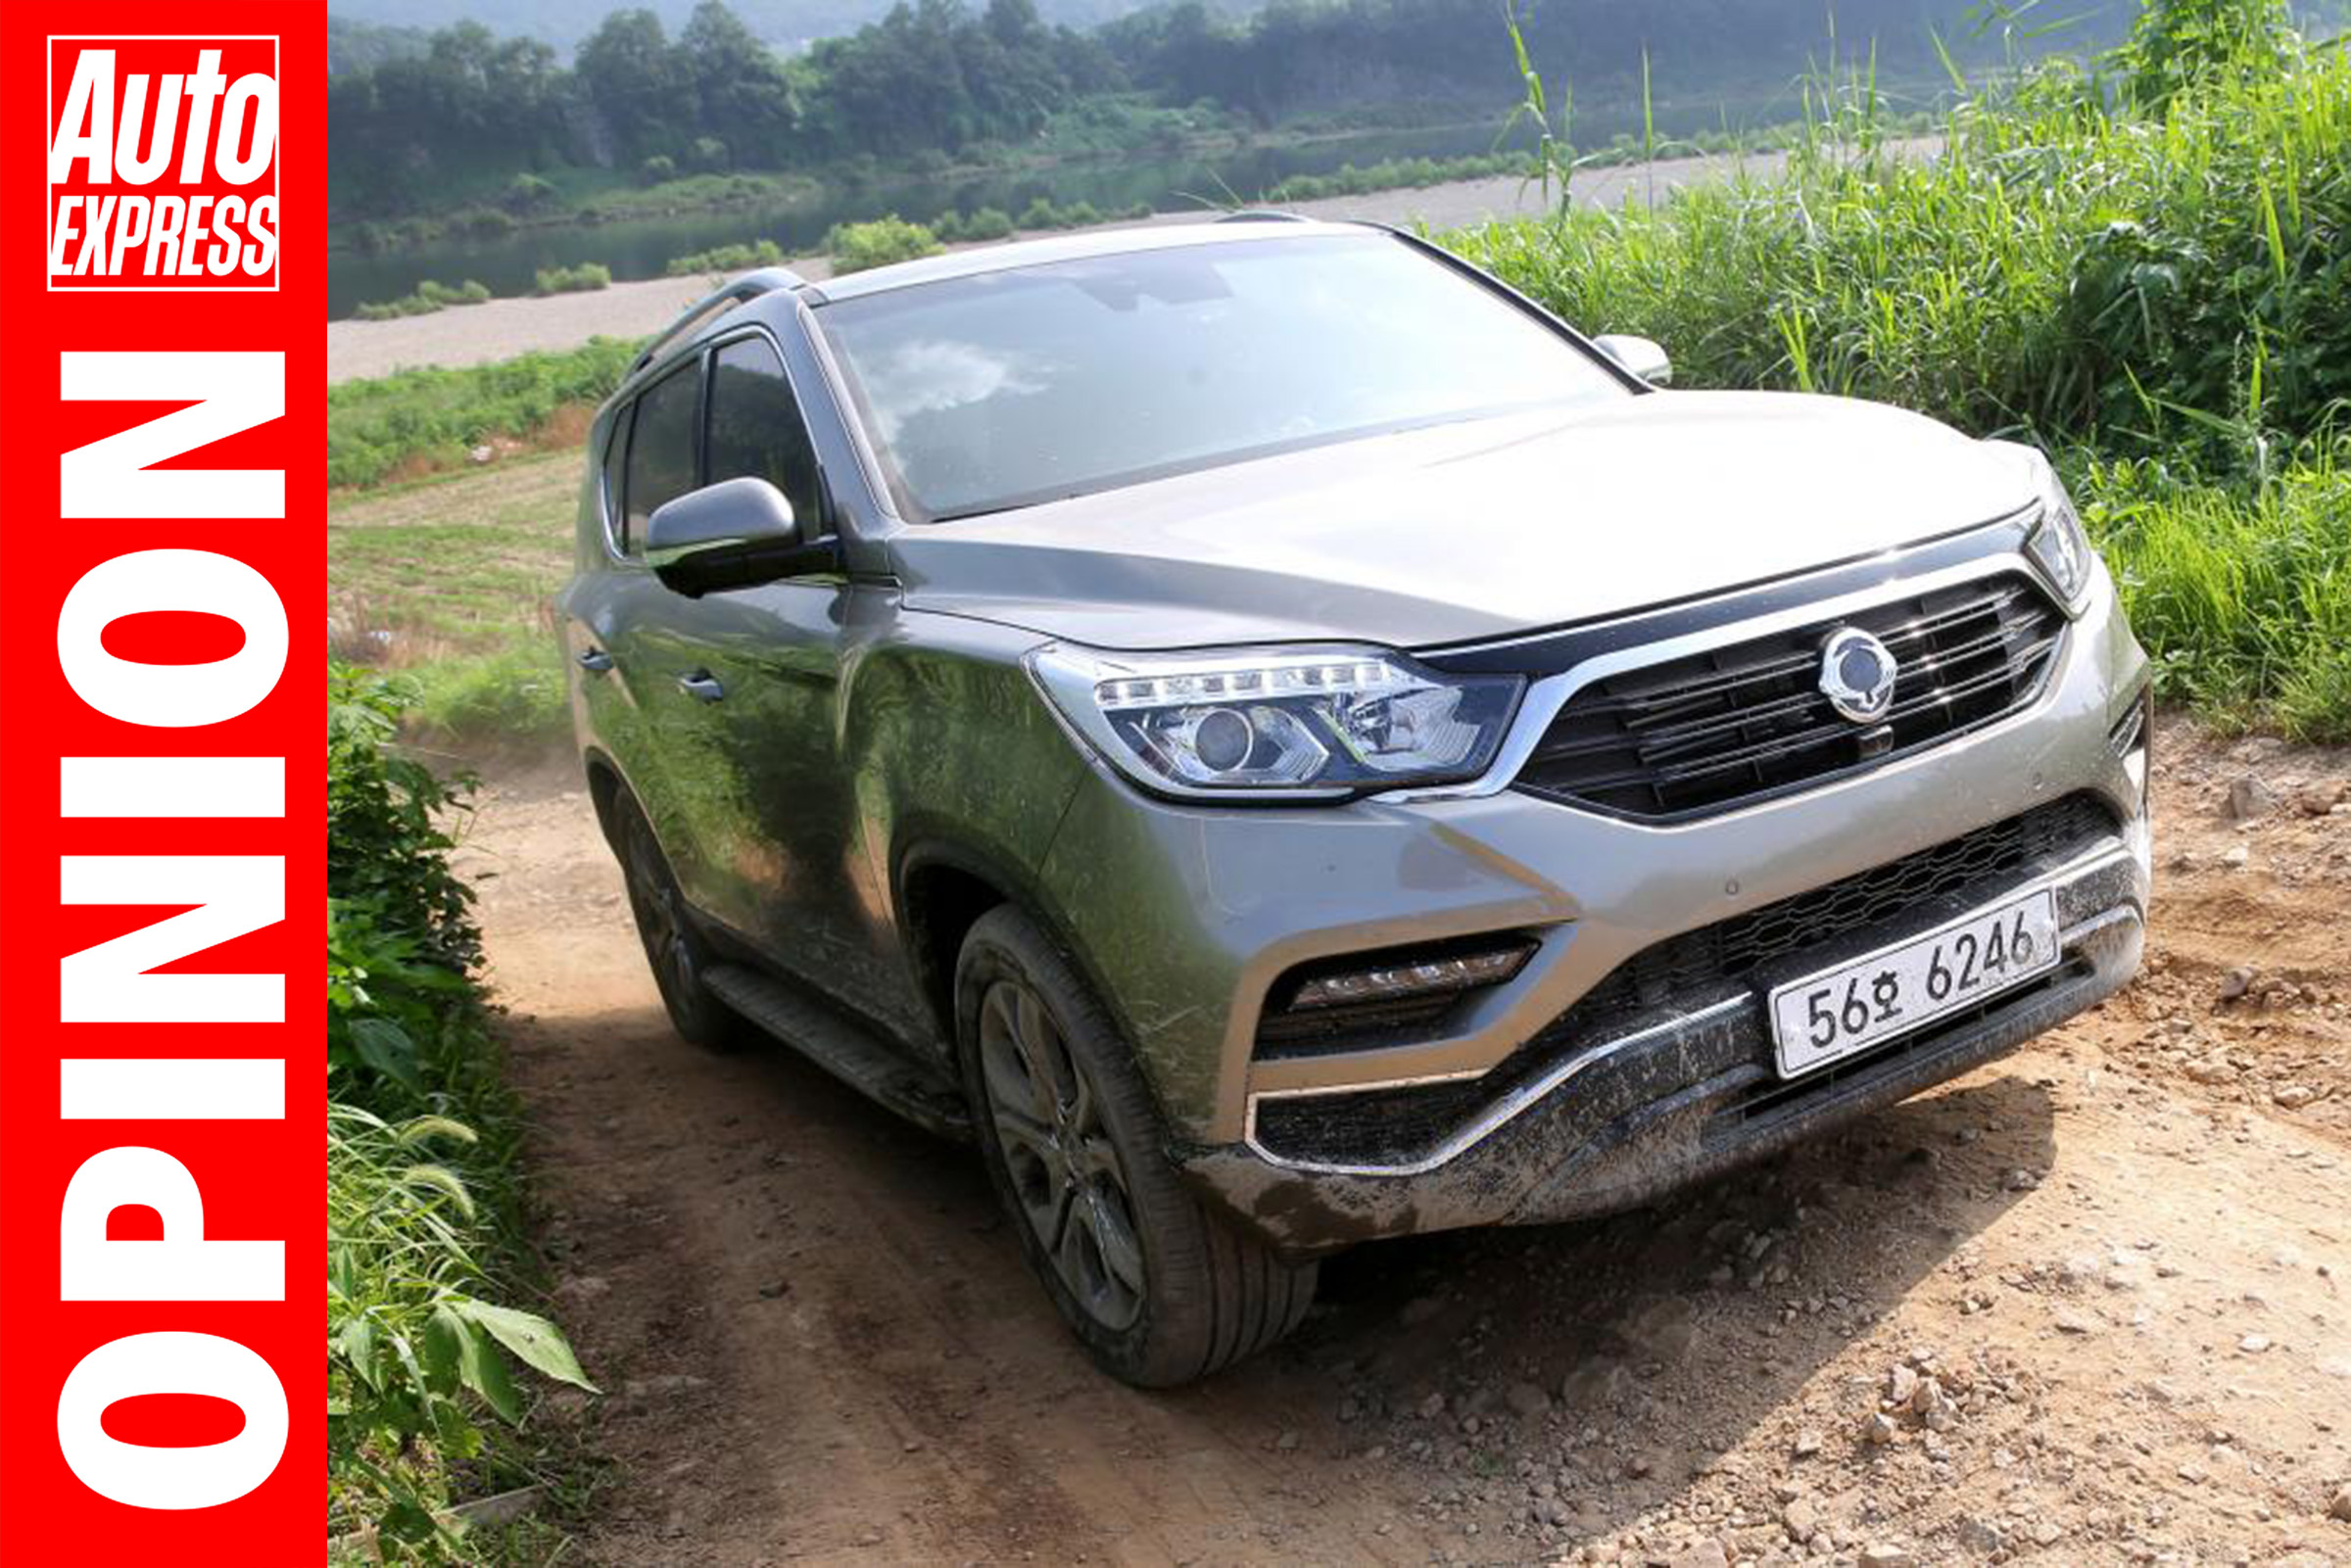 'The SsangYong Rexton is pretty much a Swiss Army knife on 